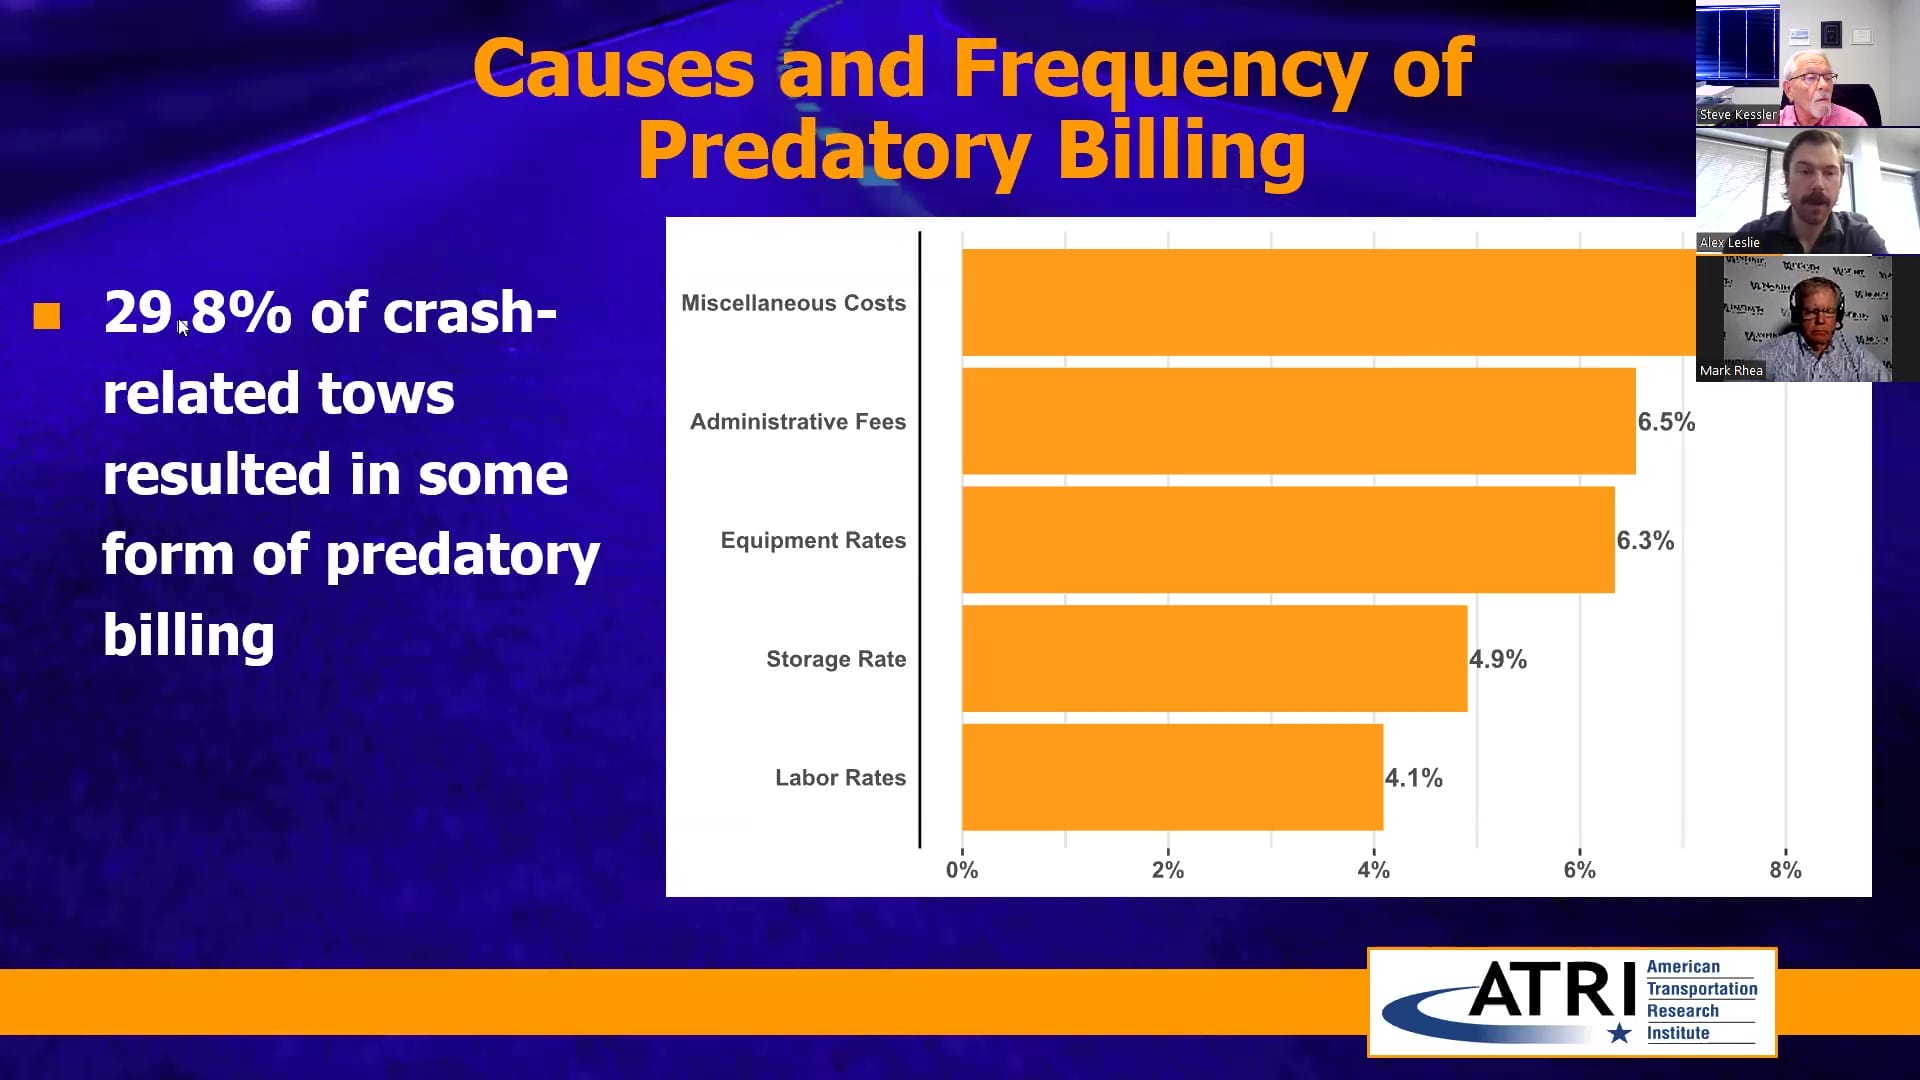 ATRI’s Research on Predatory Towing Causes and Frequency of Predatory Billing